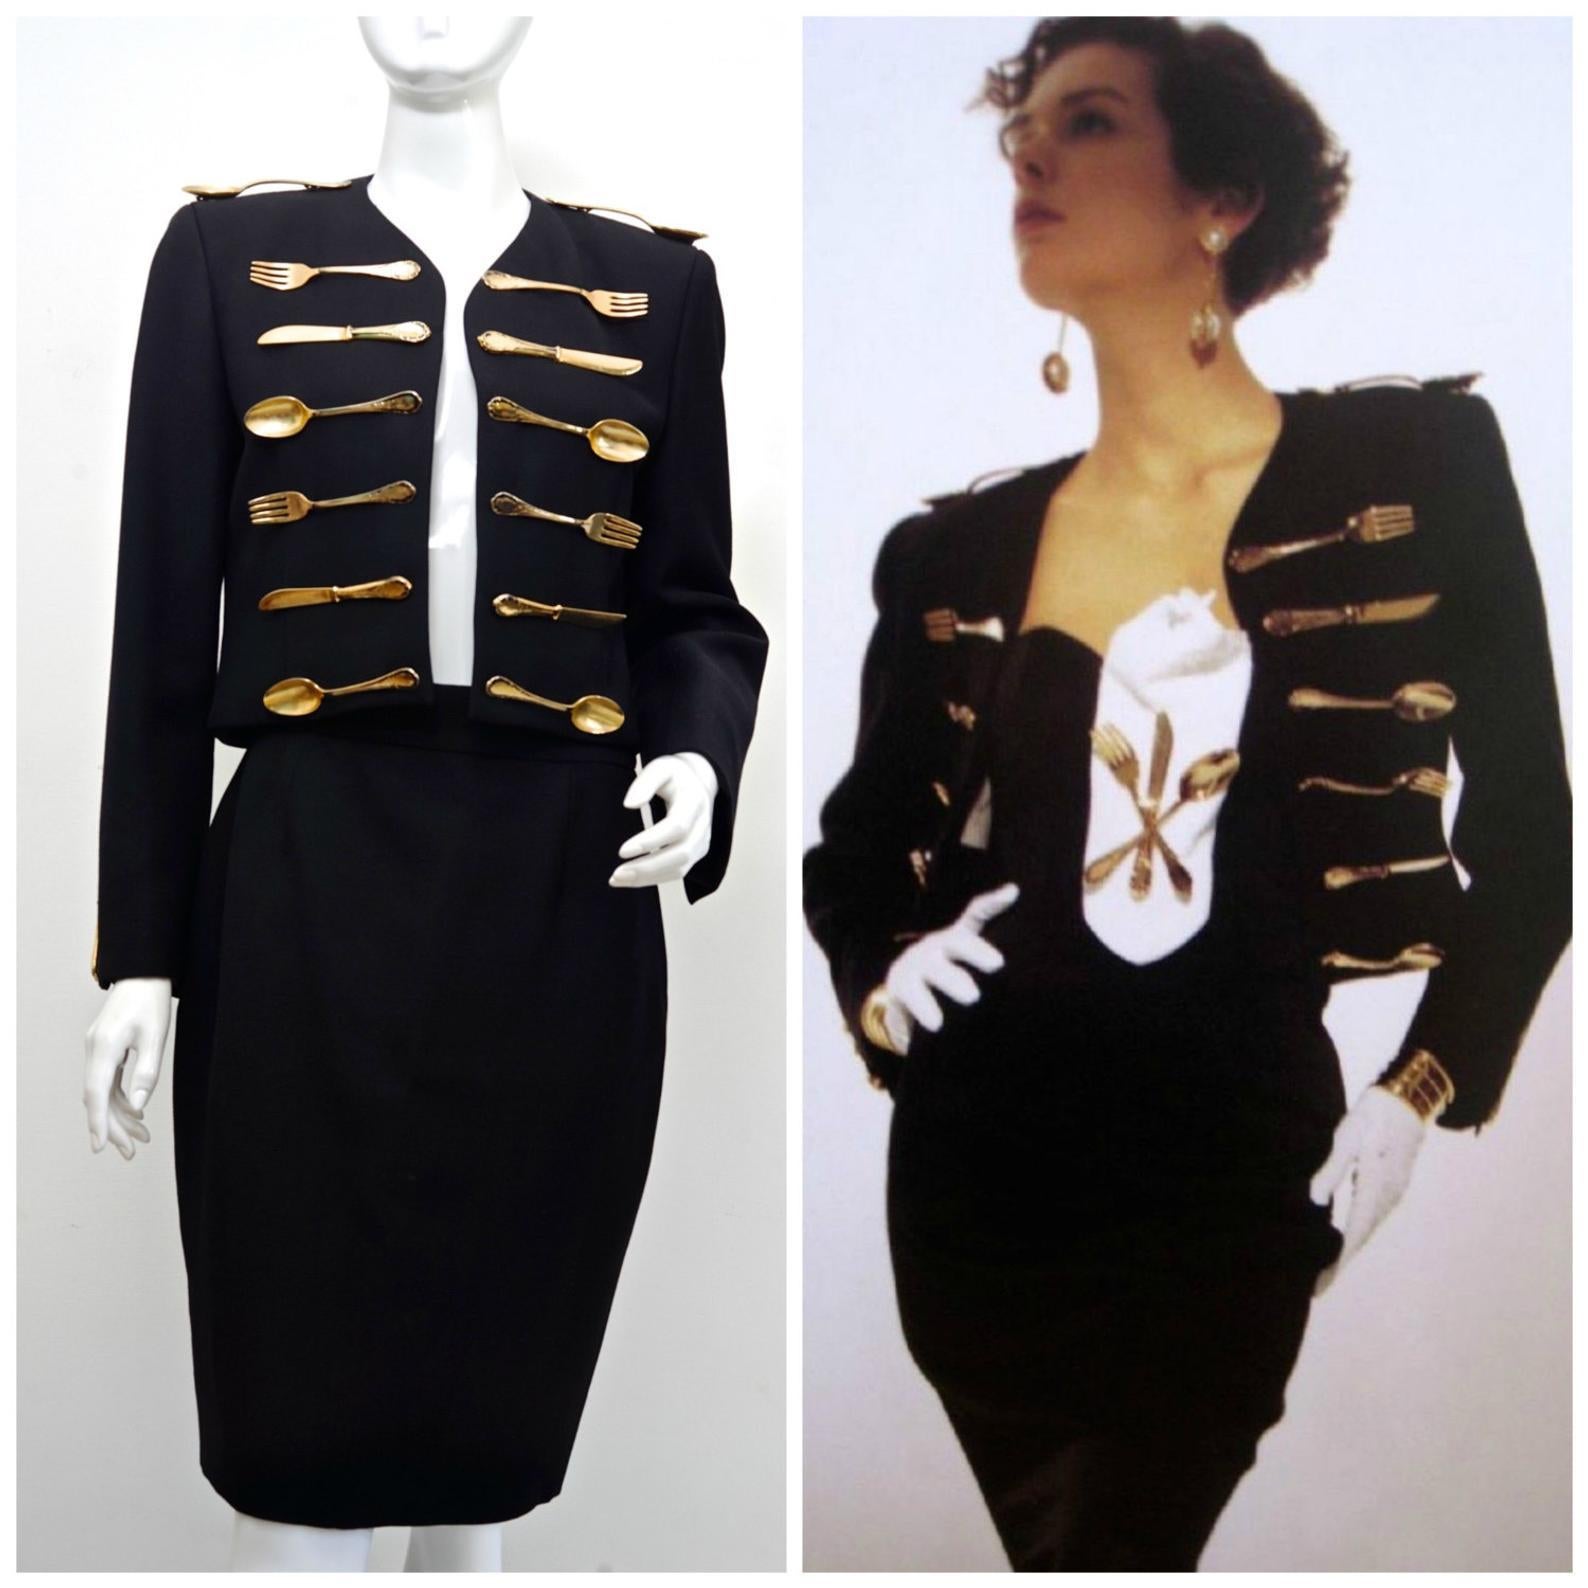 A very RARE Moschino Dinner Jacket Skirt Suit Museum piece.
From his 